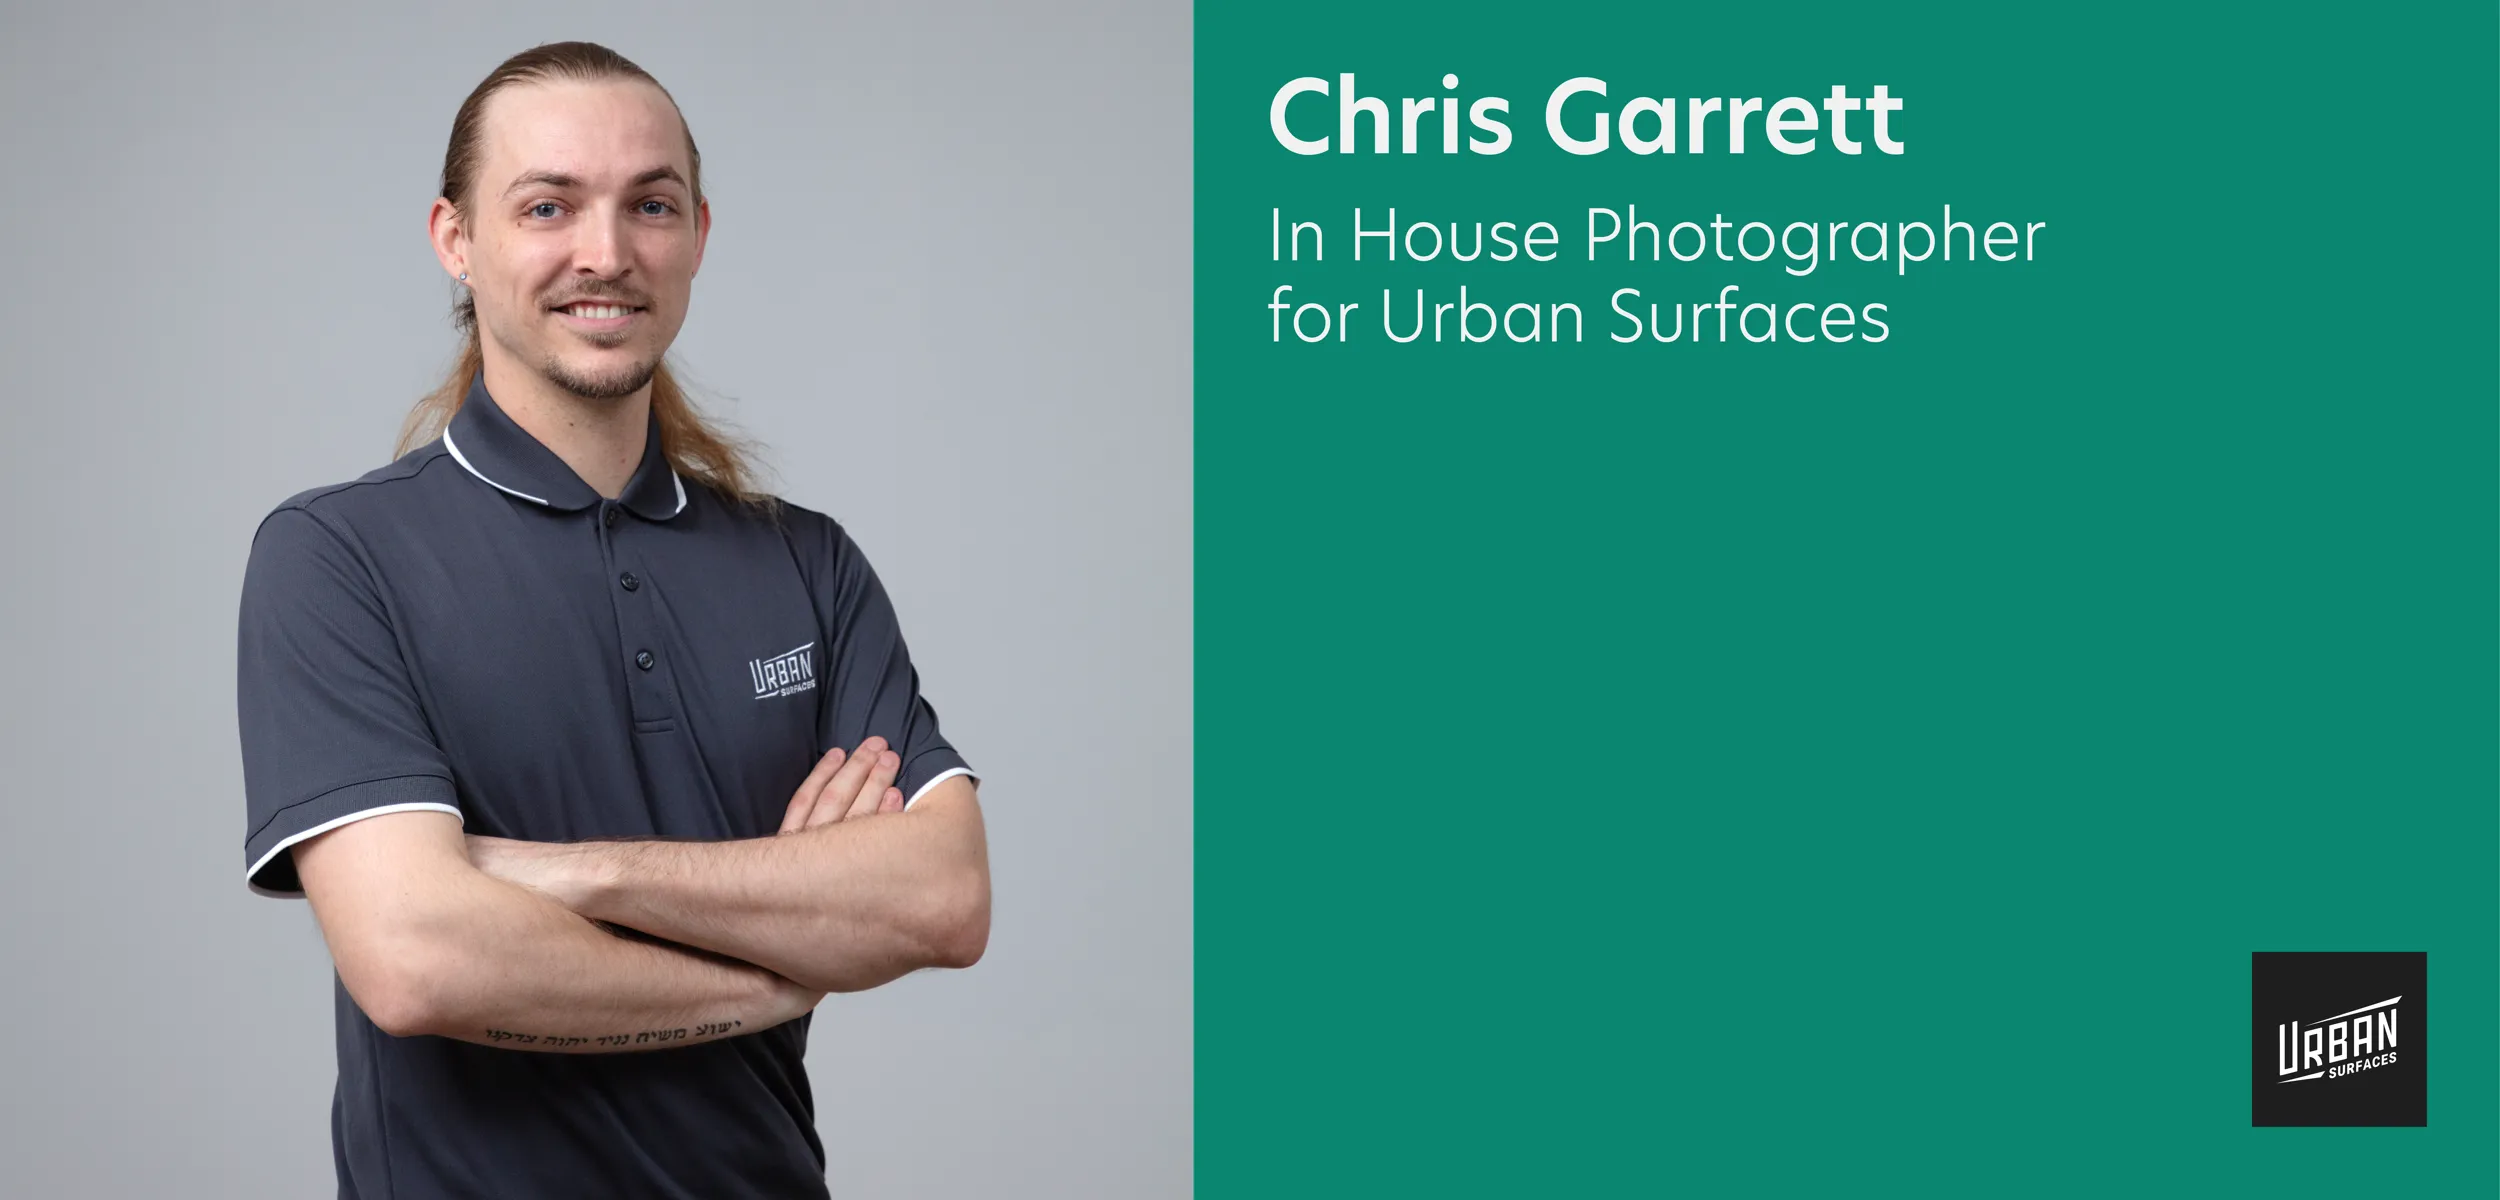 Chris smiling with arms folded. Text says "Chris Garrett, In-House Photographer for Urban Surfaces"